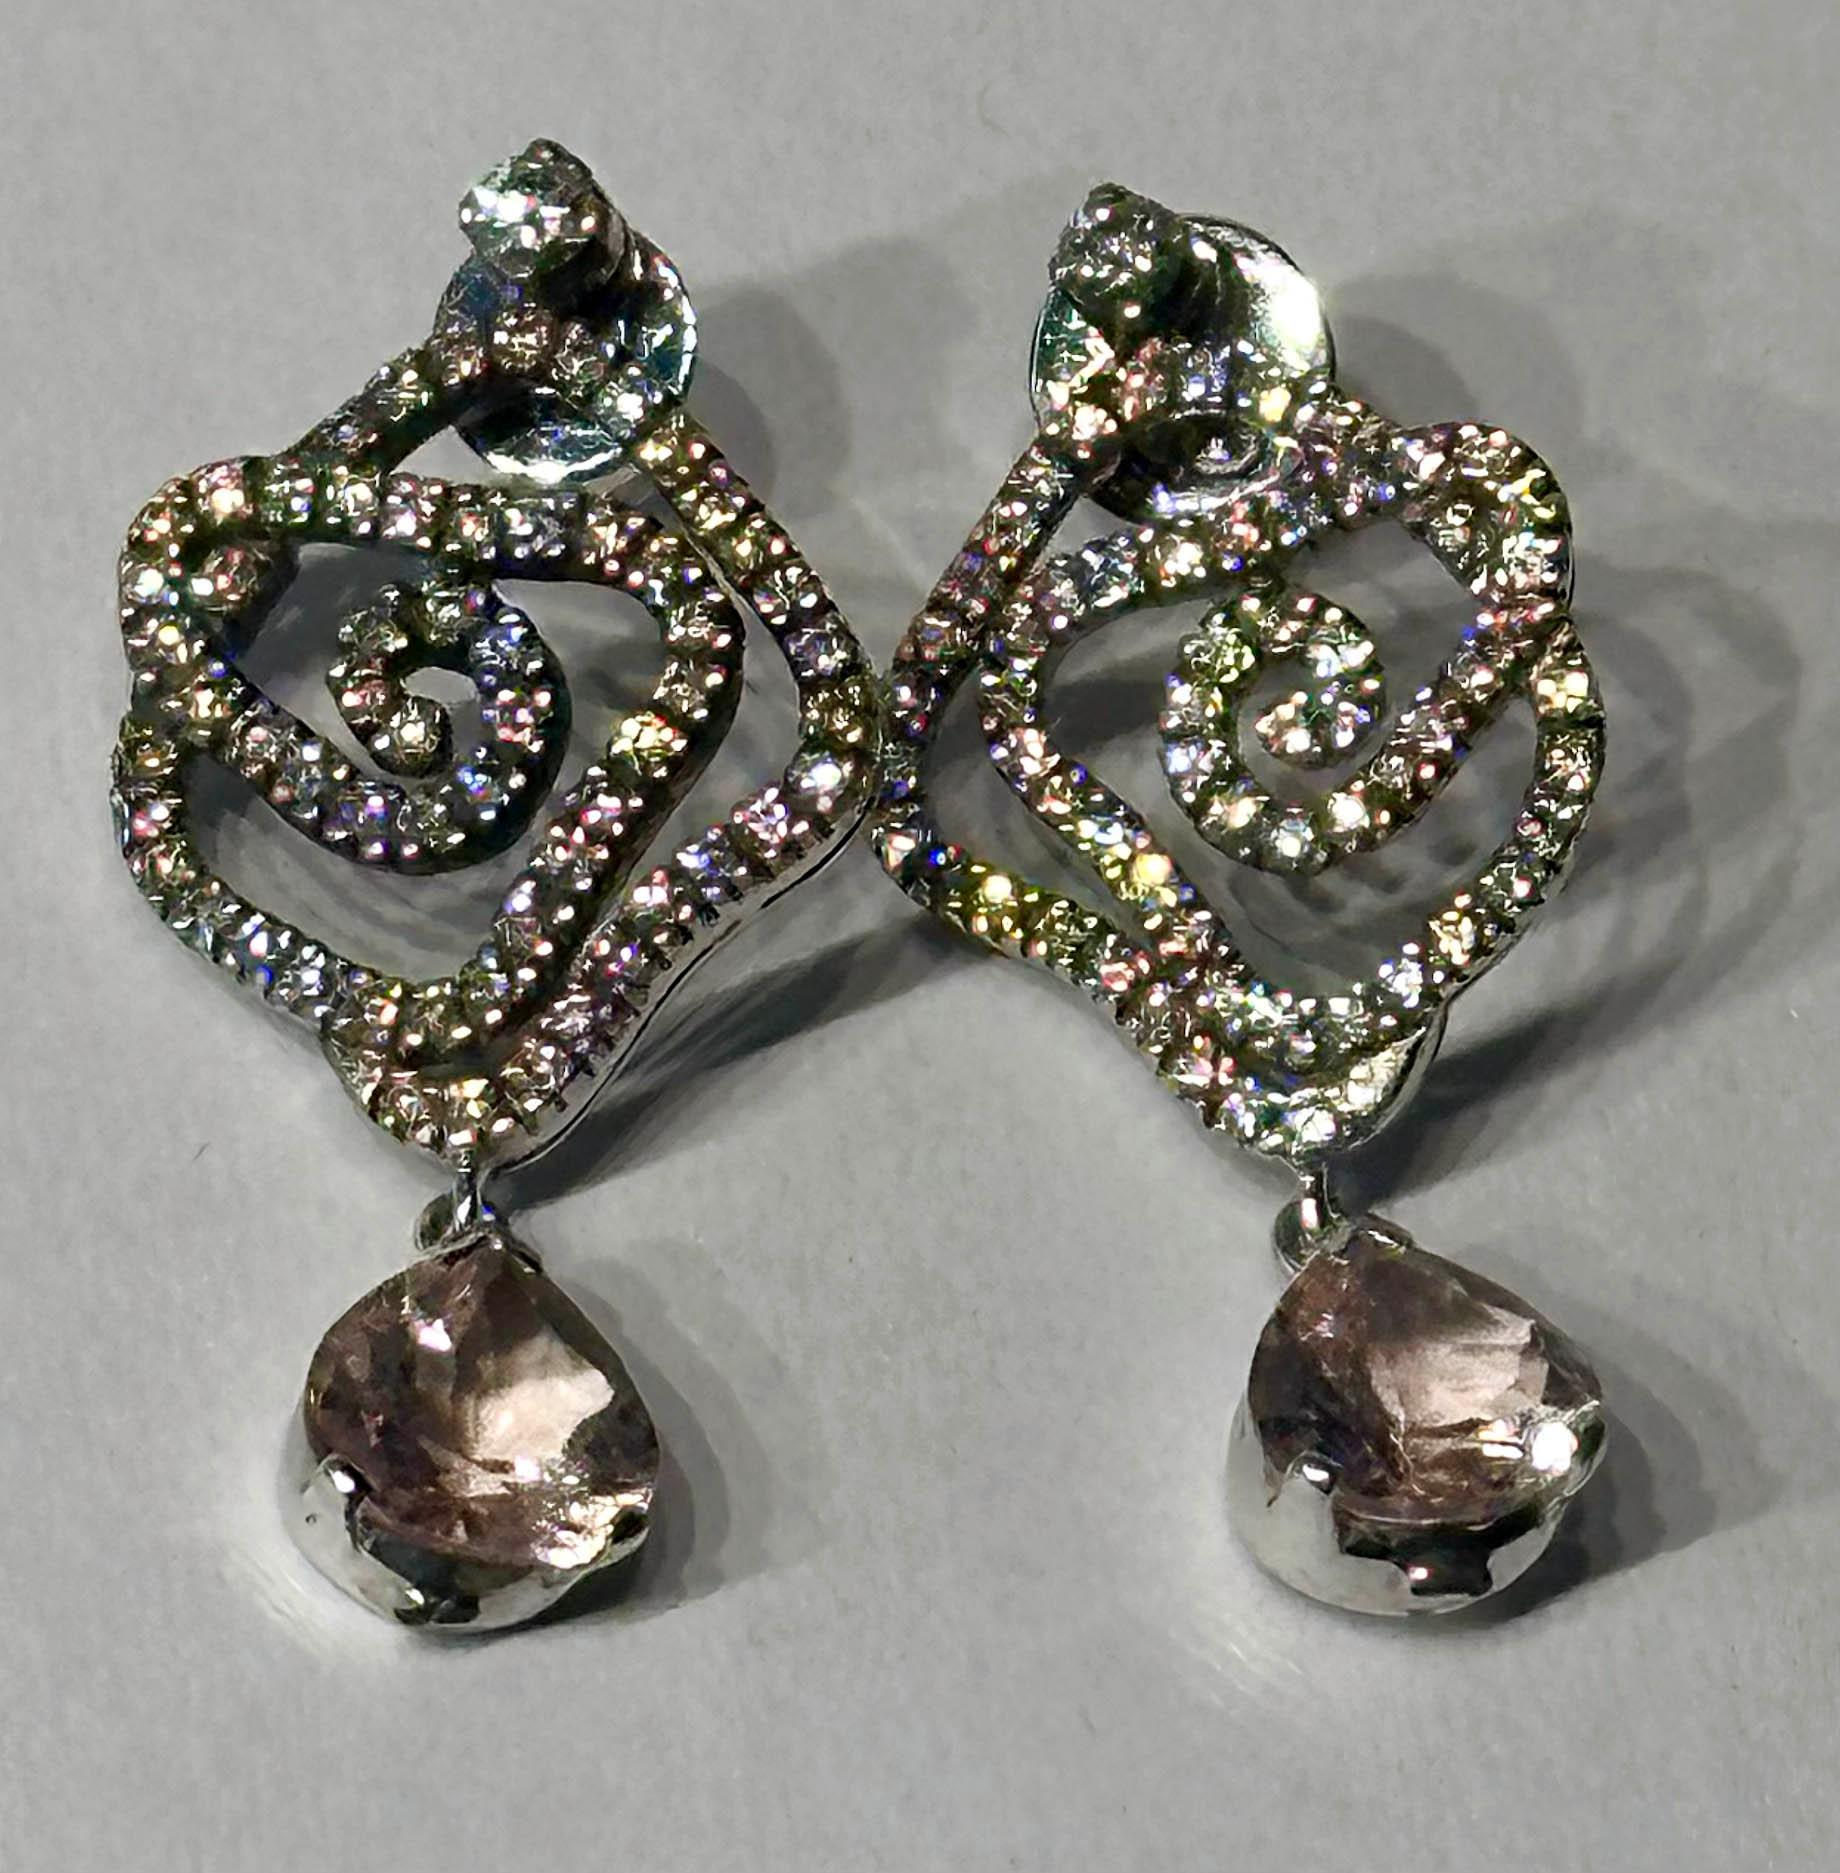 A Pair of Blackened 18kt White Gold Diamond Earrings with Morganite Dangles For Sale 2